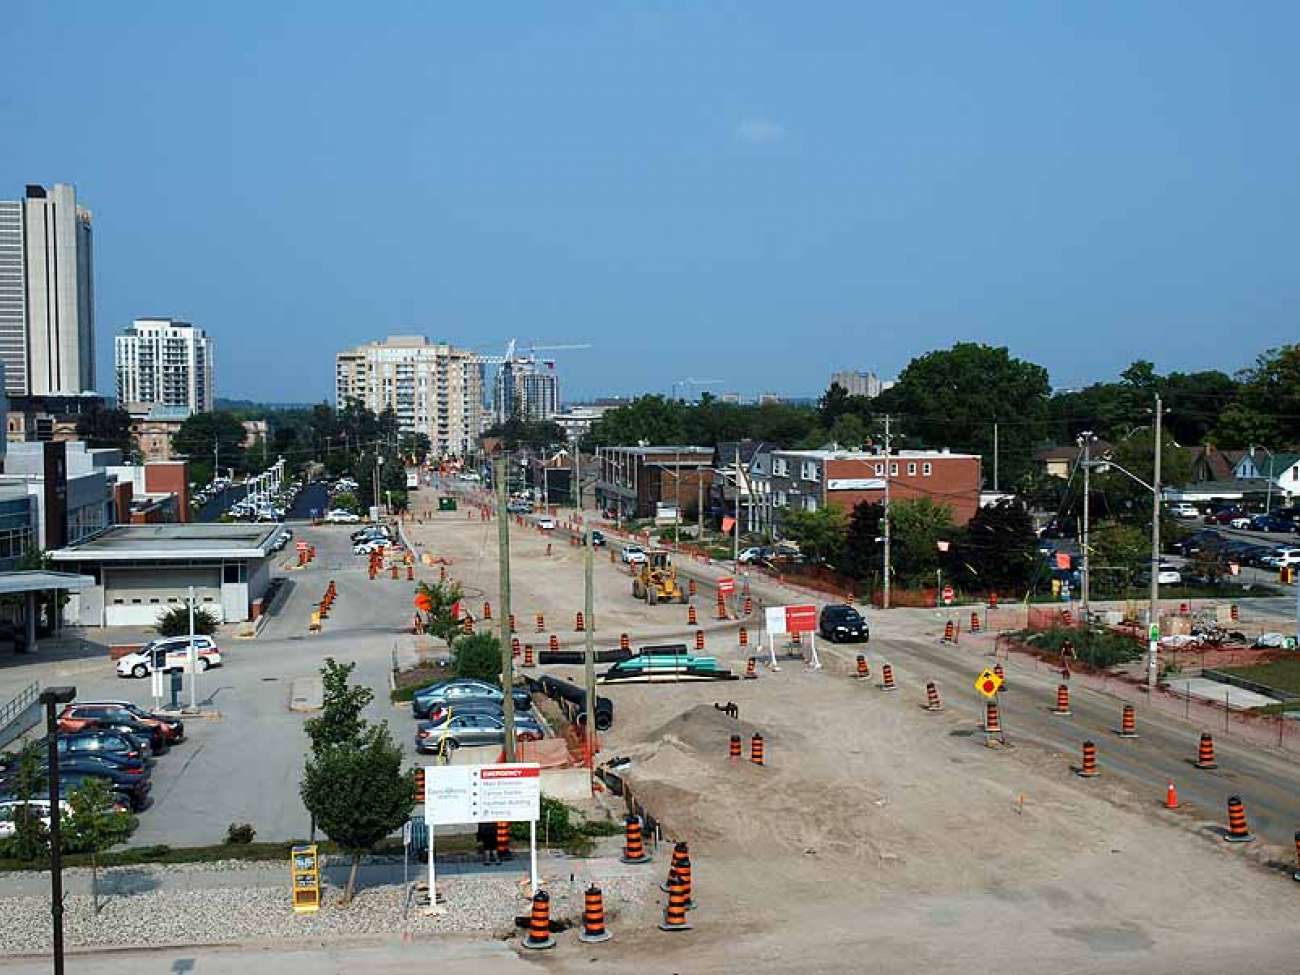 September 2015: construction moves to the south side of King Street